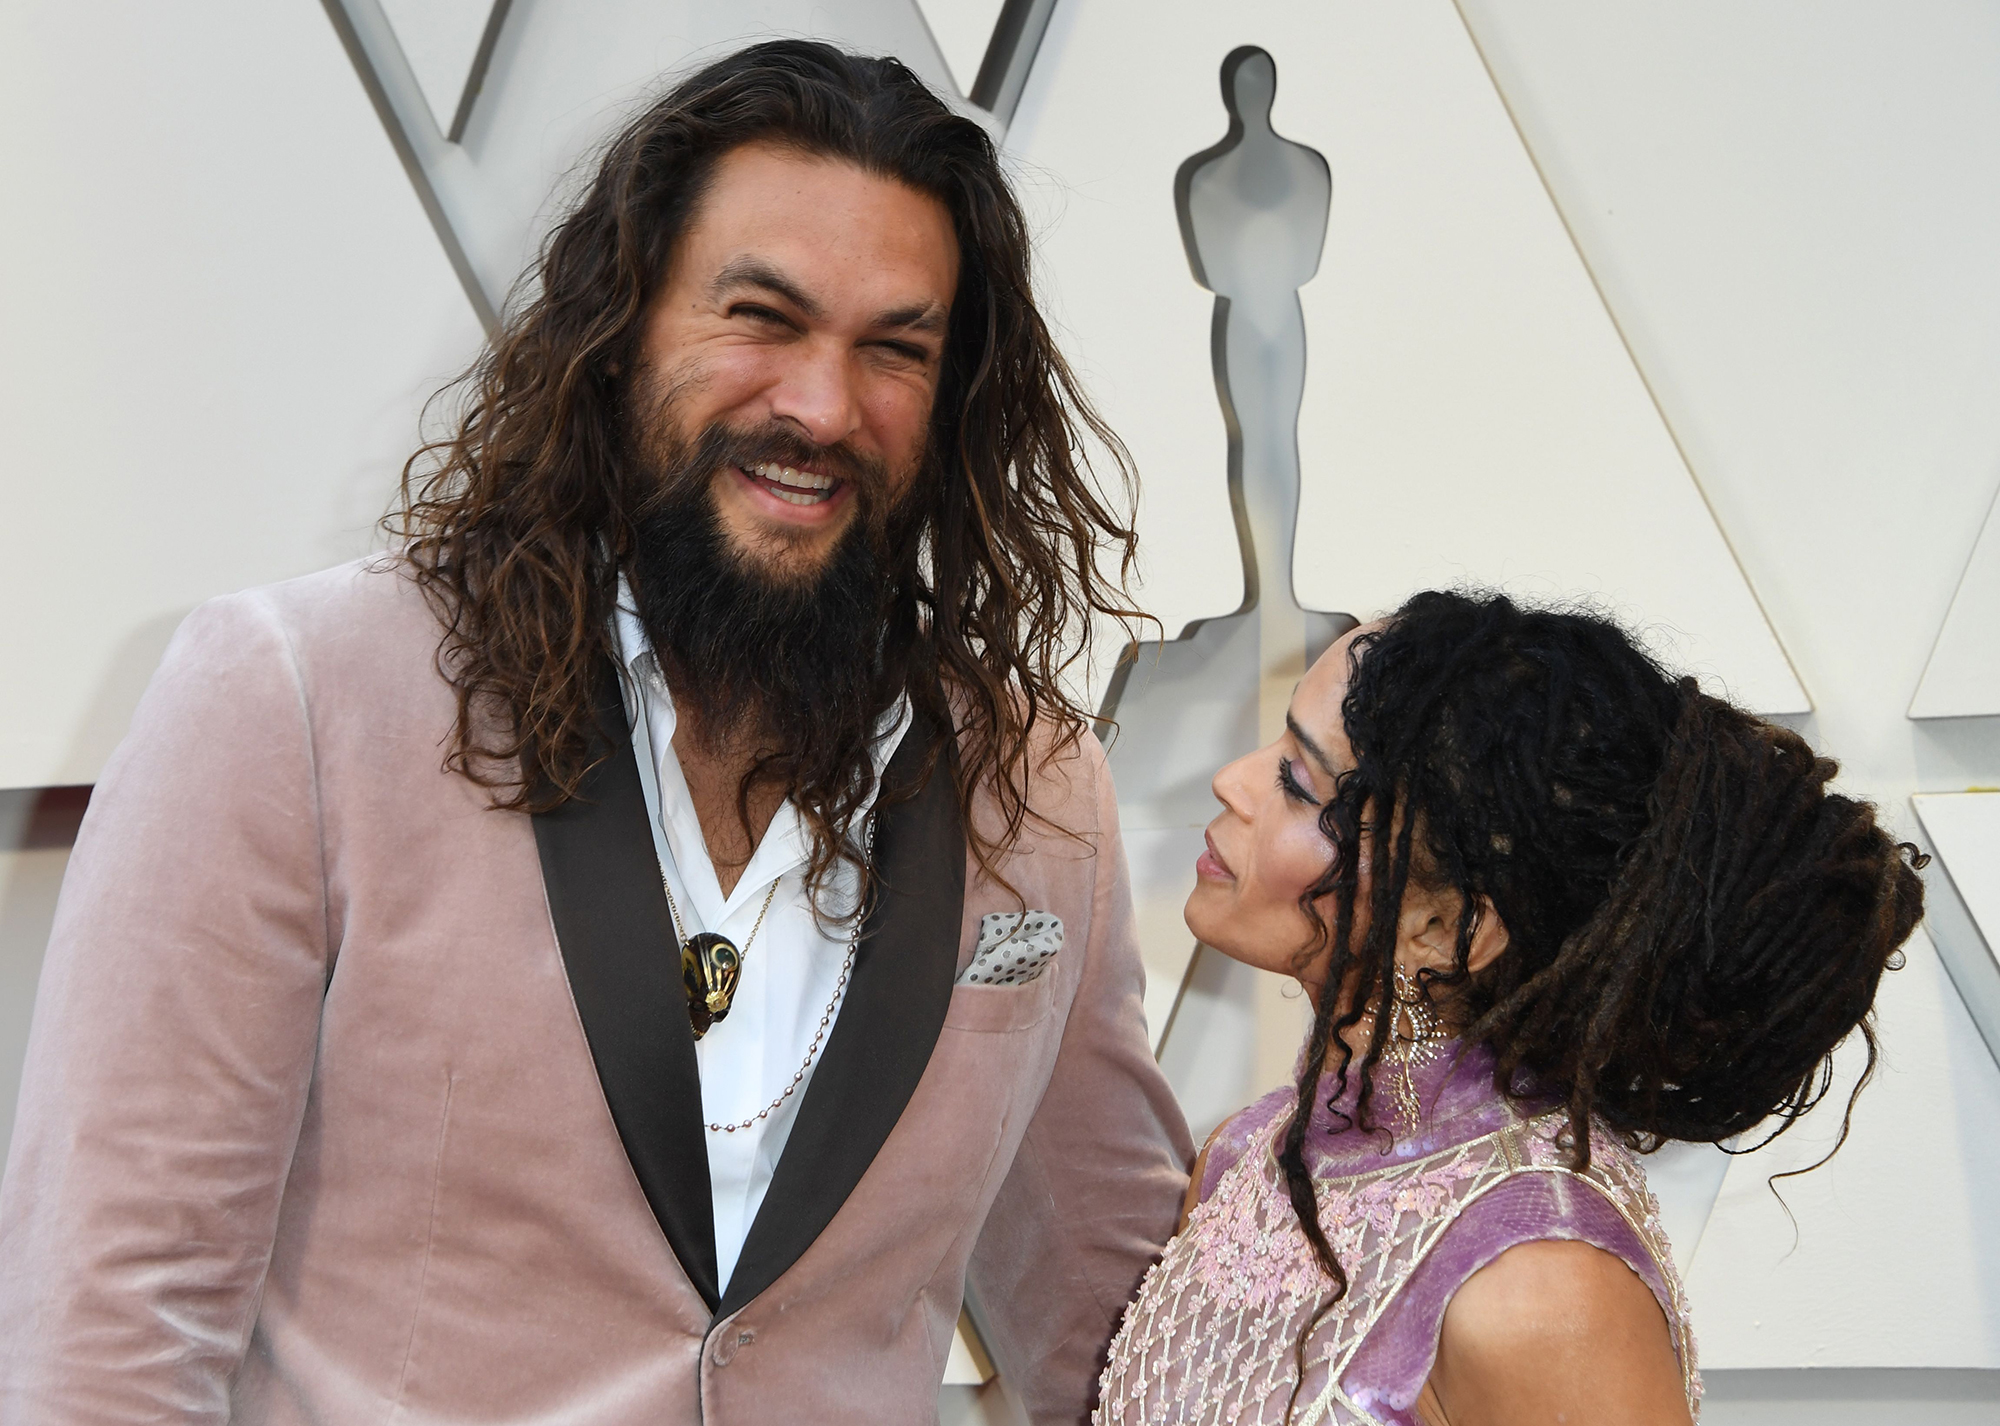 Jason-Momoa-and-Lisa-Bonet-Make-the-Perfect-Pink-Pair-on-Their-First-Oscars-Red-Carpet-2019-04.jpg